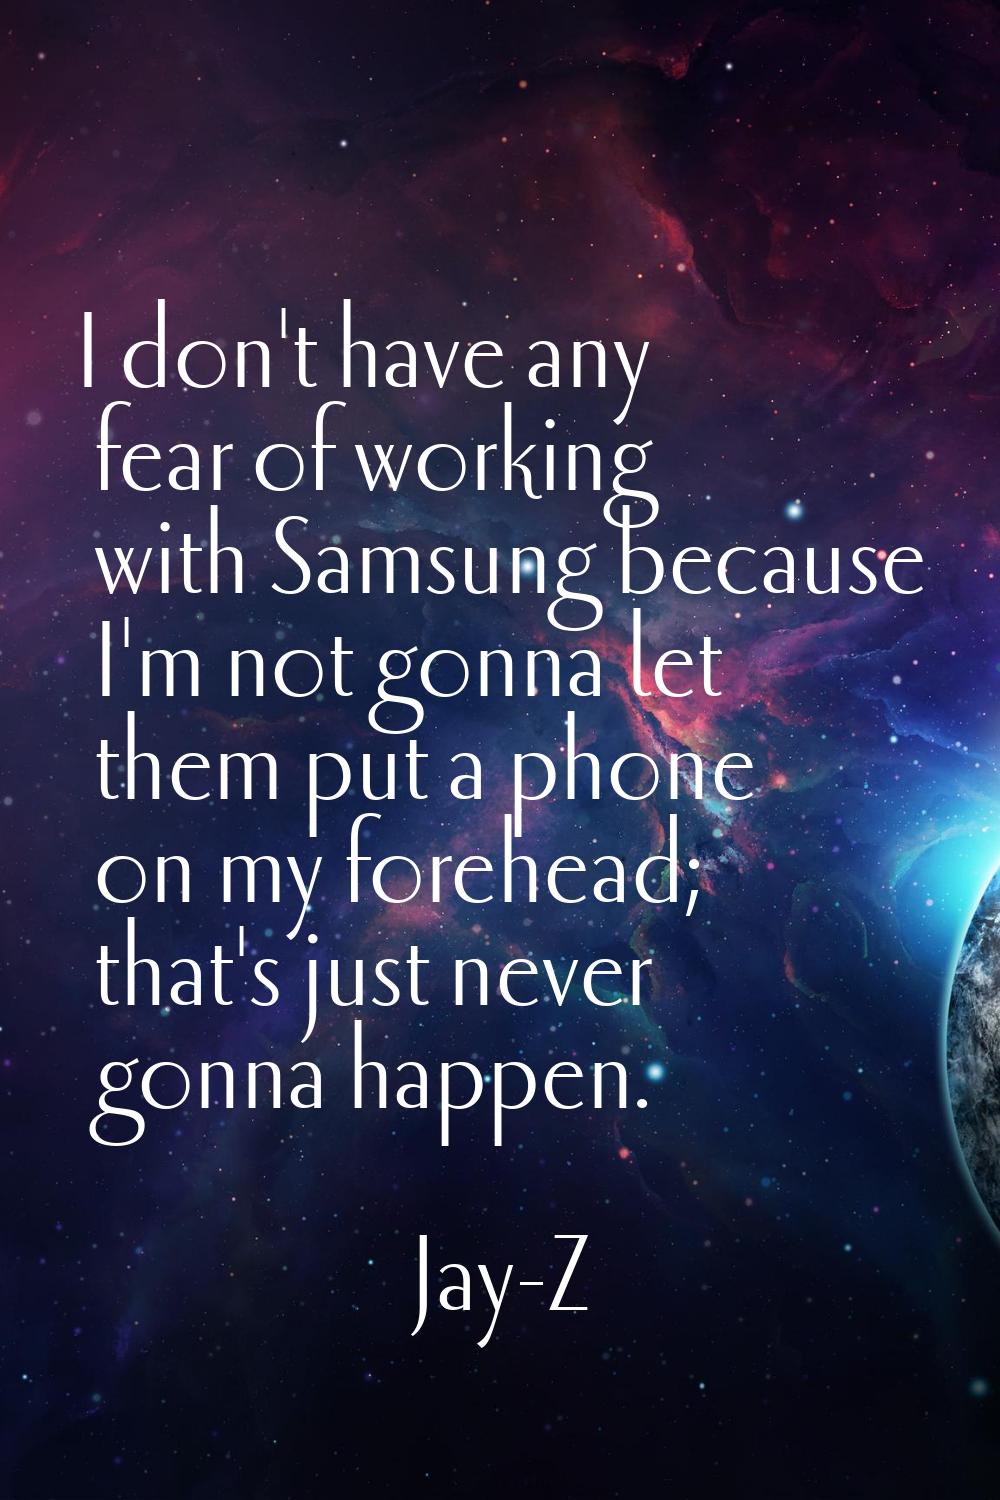 I don't have any fear of working with Samsung because I'm not gonna let them put a phone on my fore